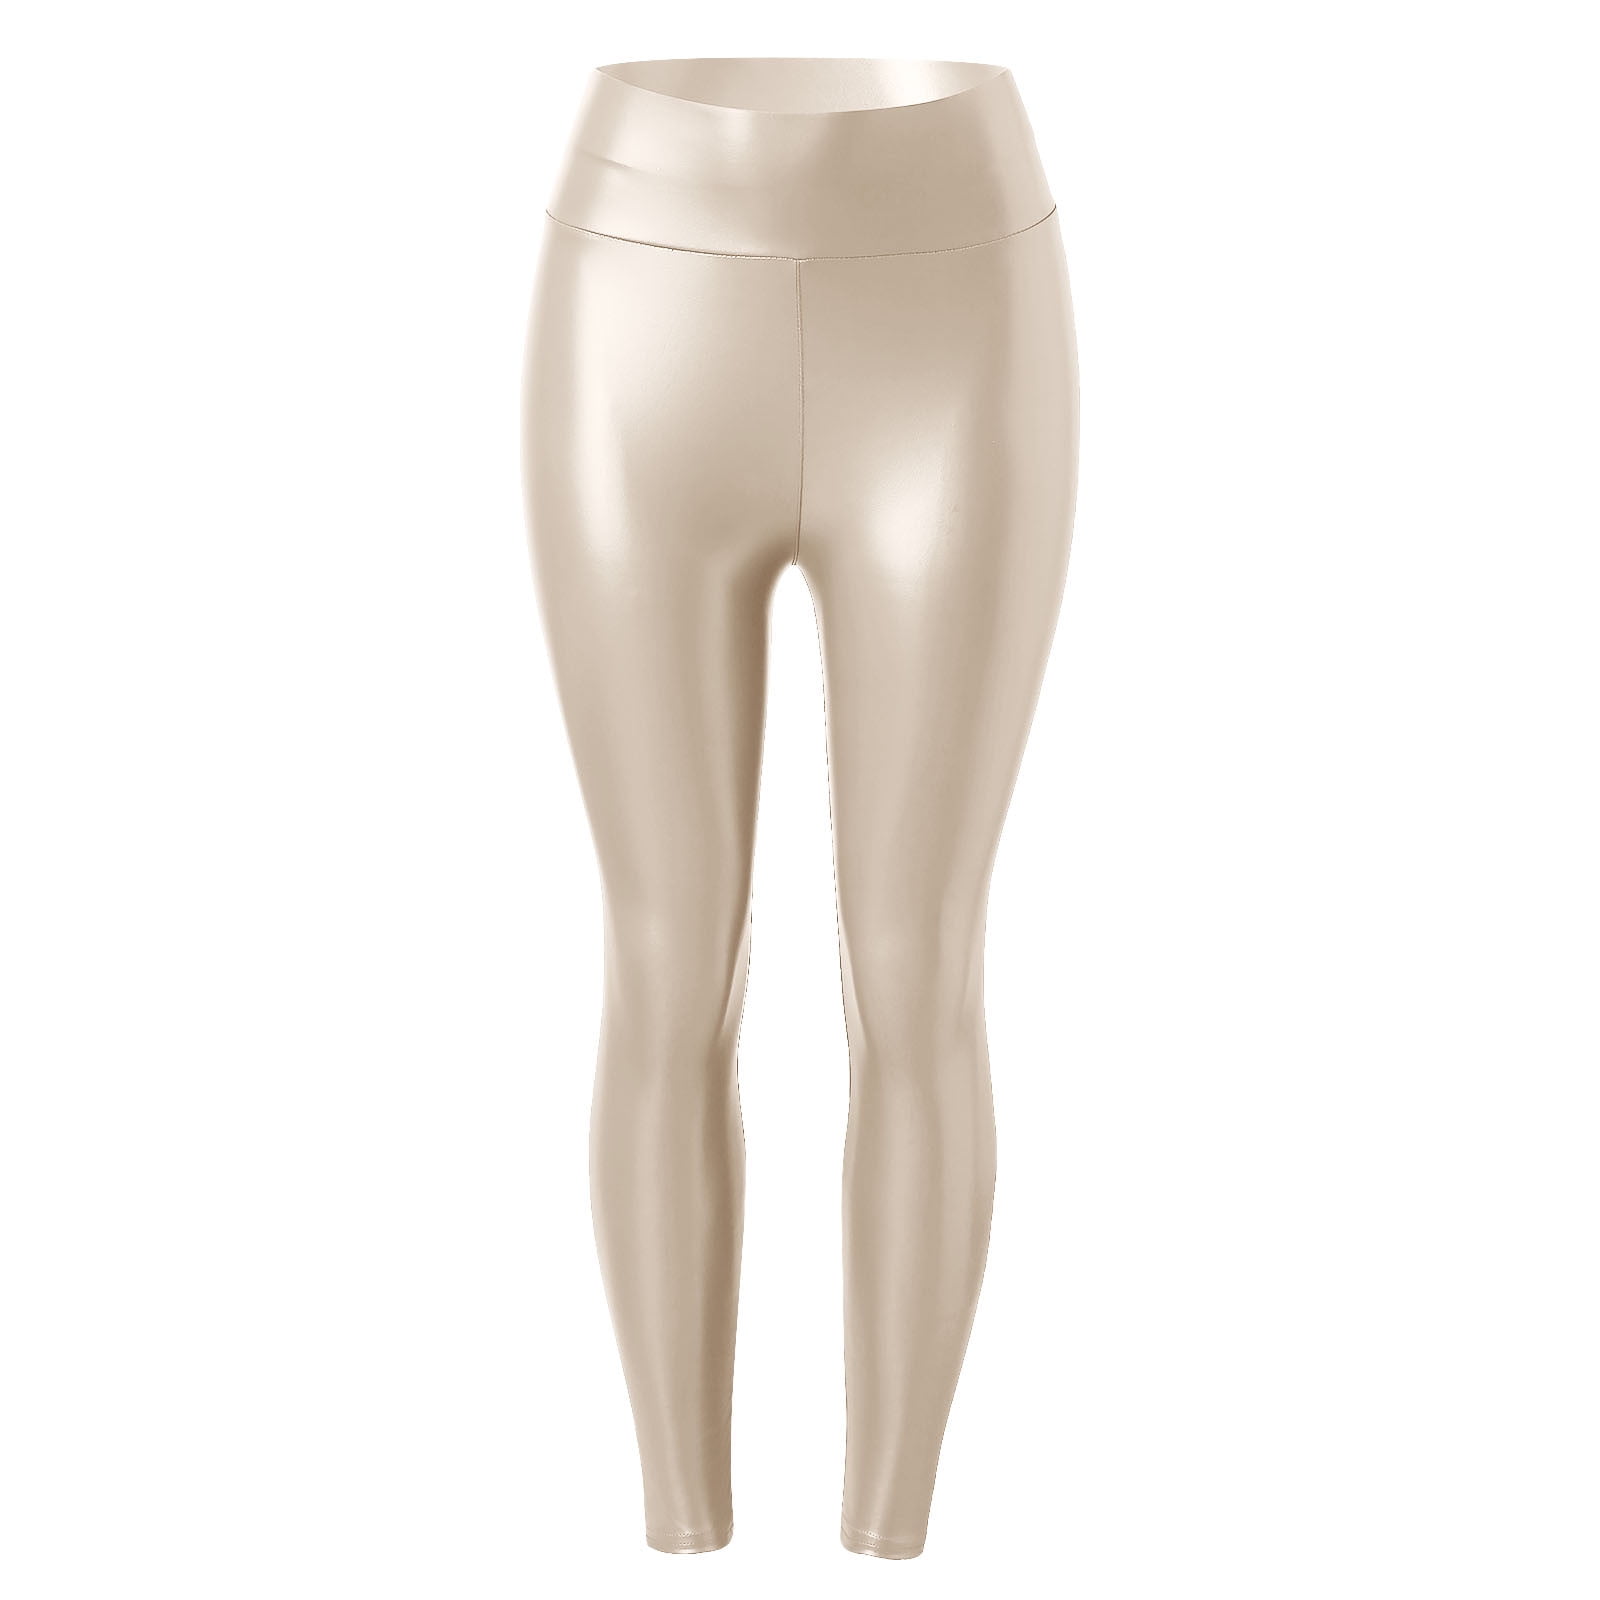 Pgeraug womens pants Leather Leggings Stretch High Waisted Pleather pants  for women Beige S 